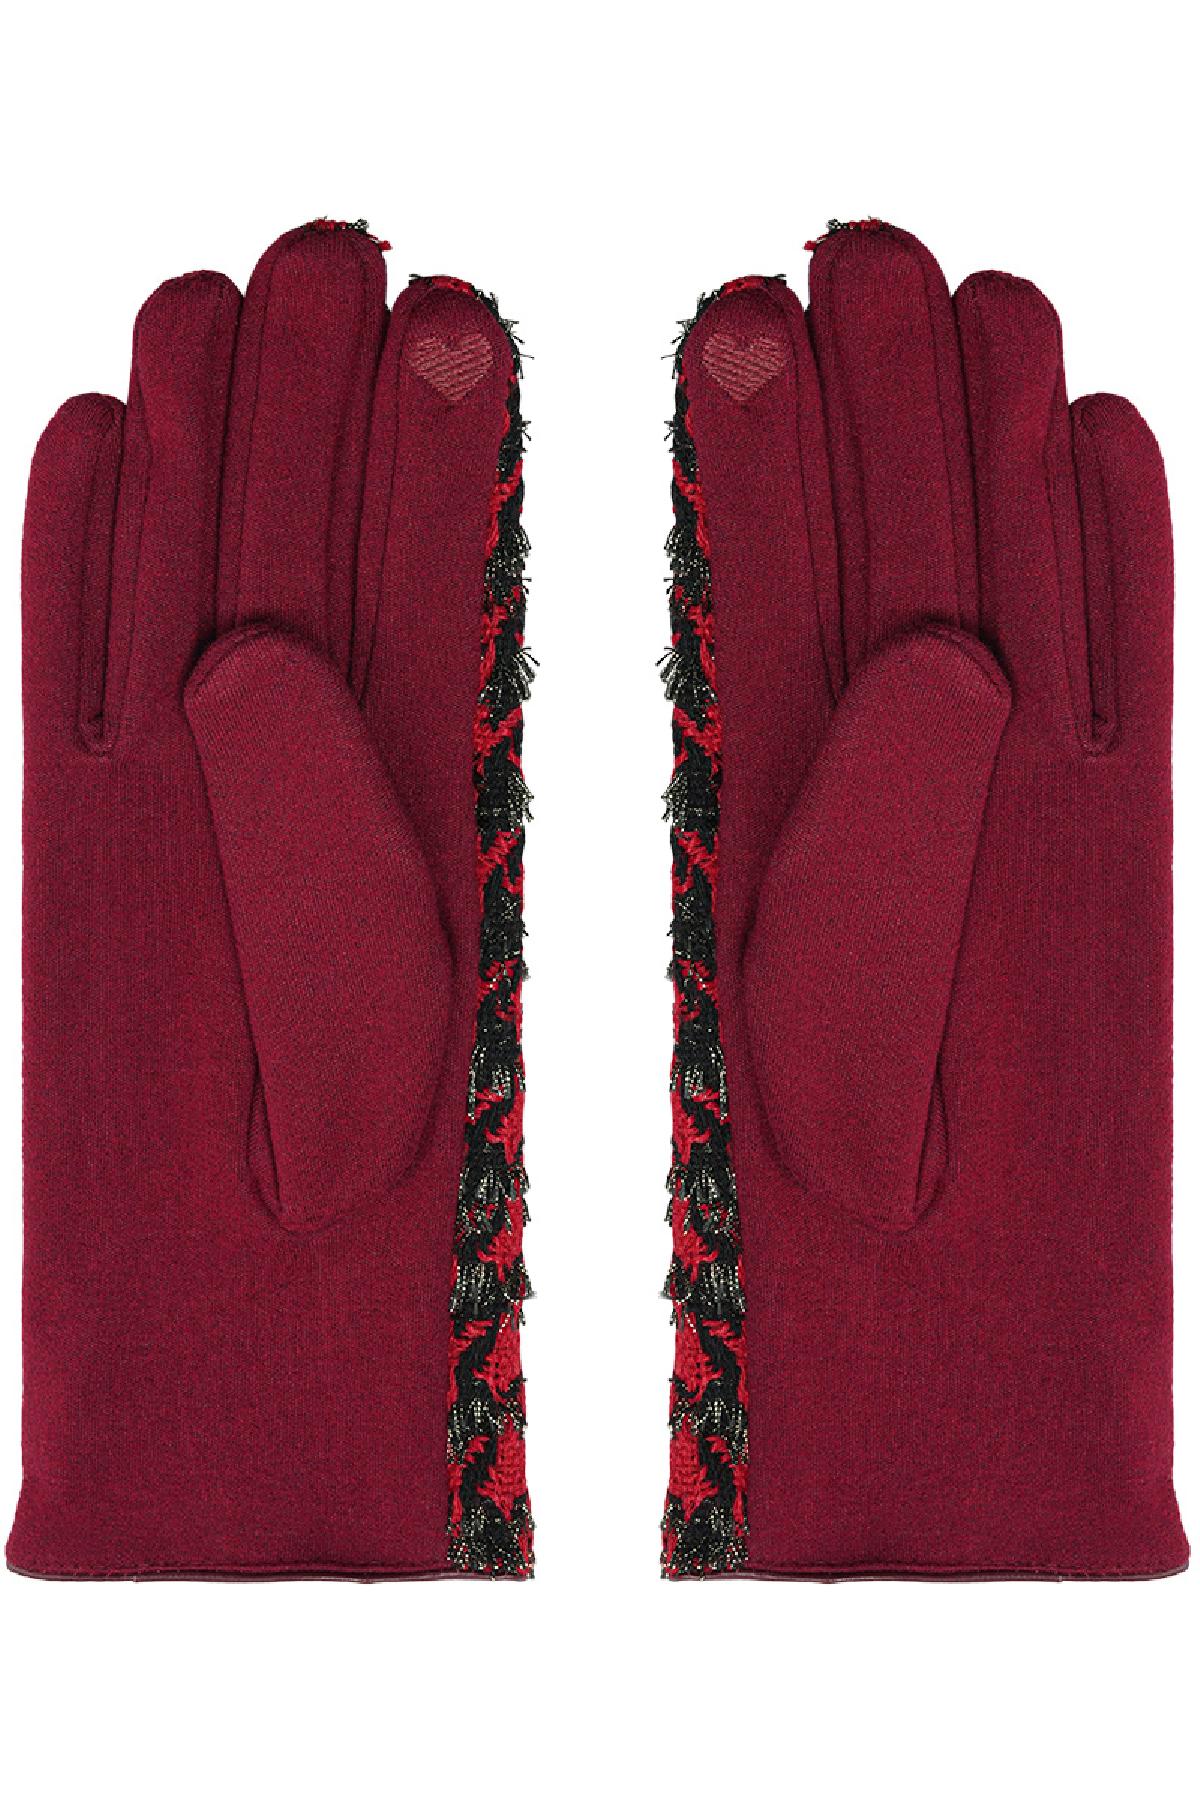 Pied de poule gloves Red Polyester One size h5 Picture2